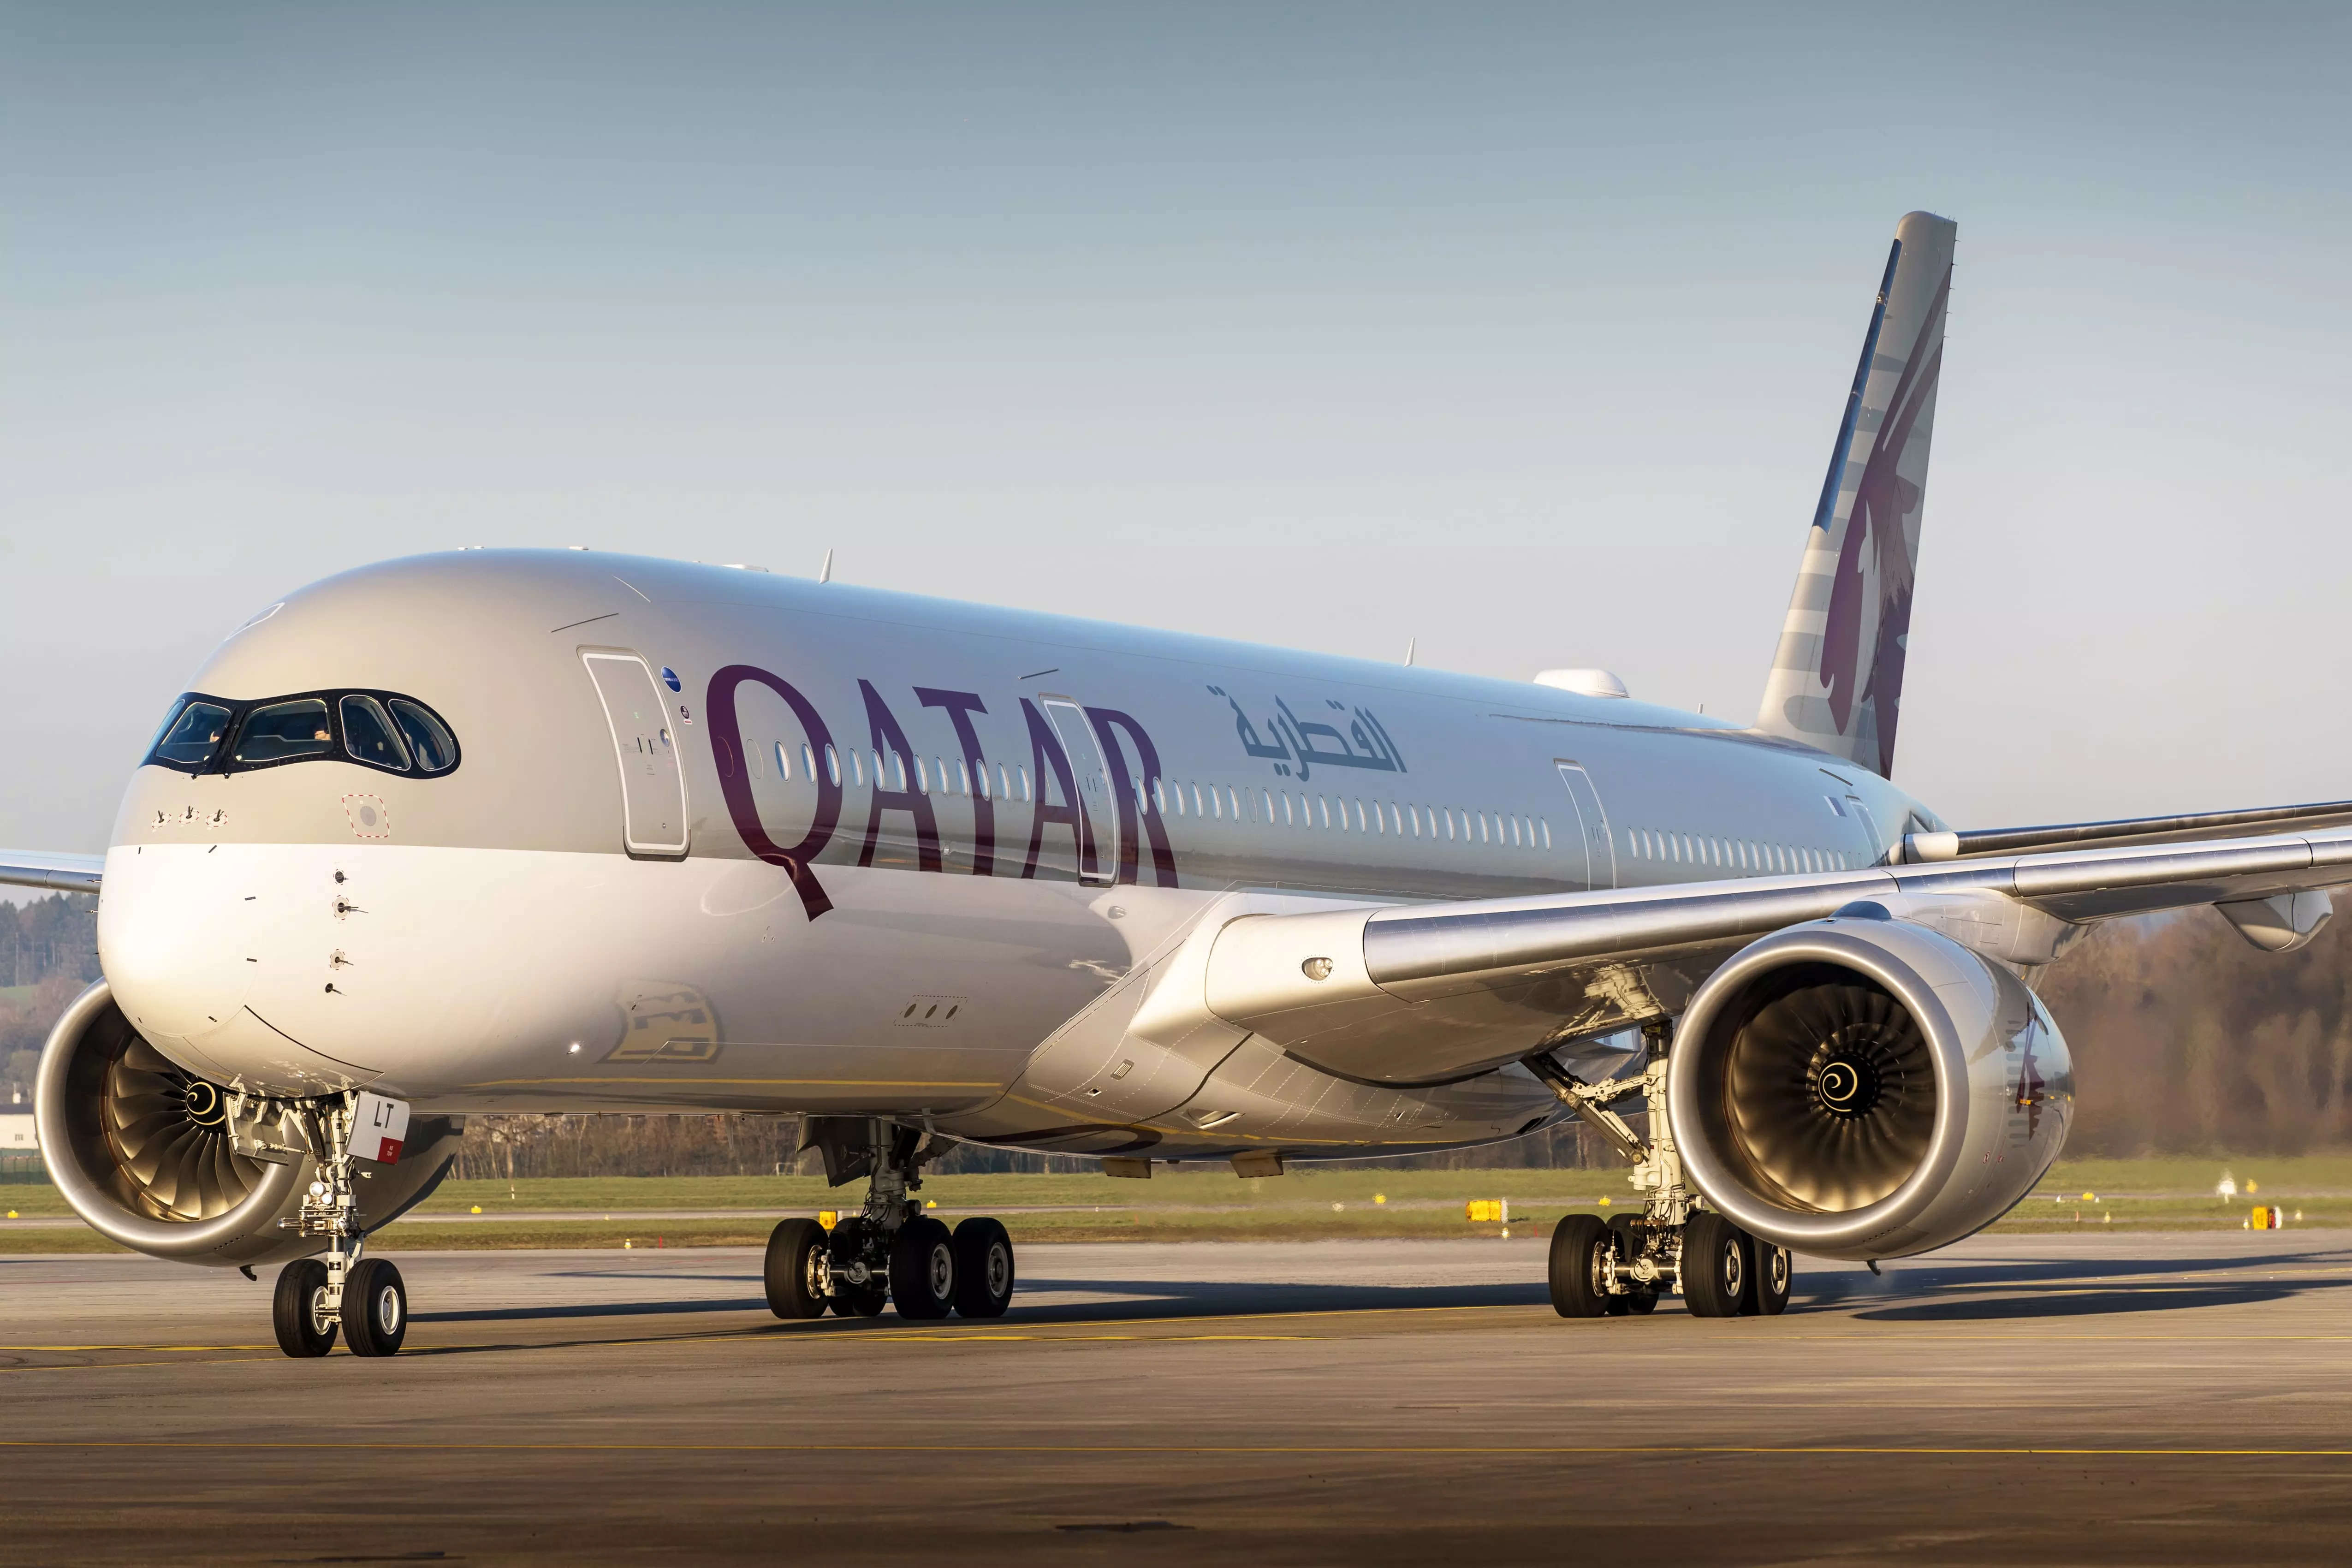 Now, Qatar Airways receives show-cause notice for ‘failing to follow’ Covid norms